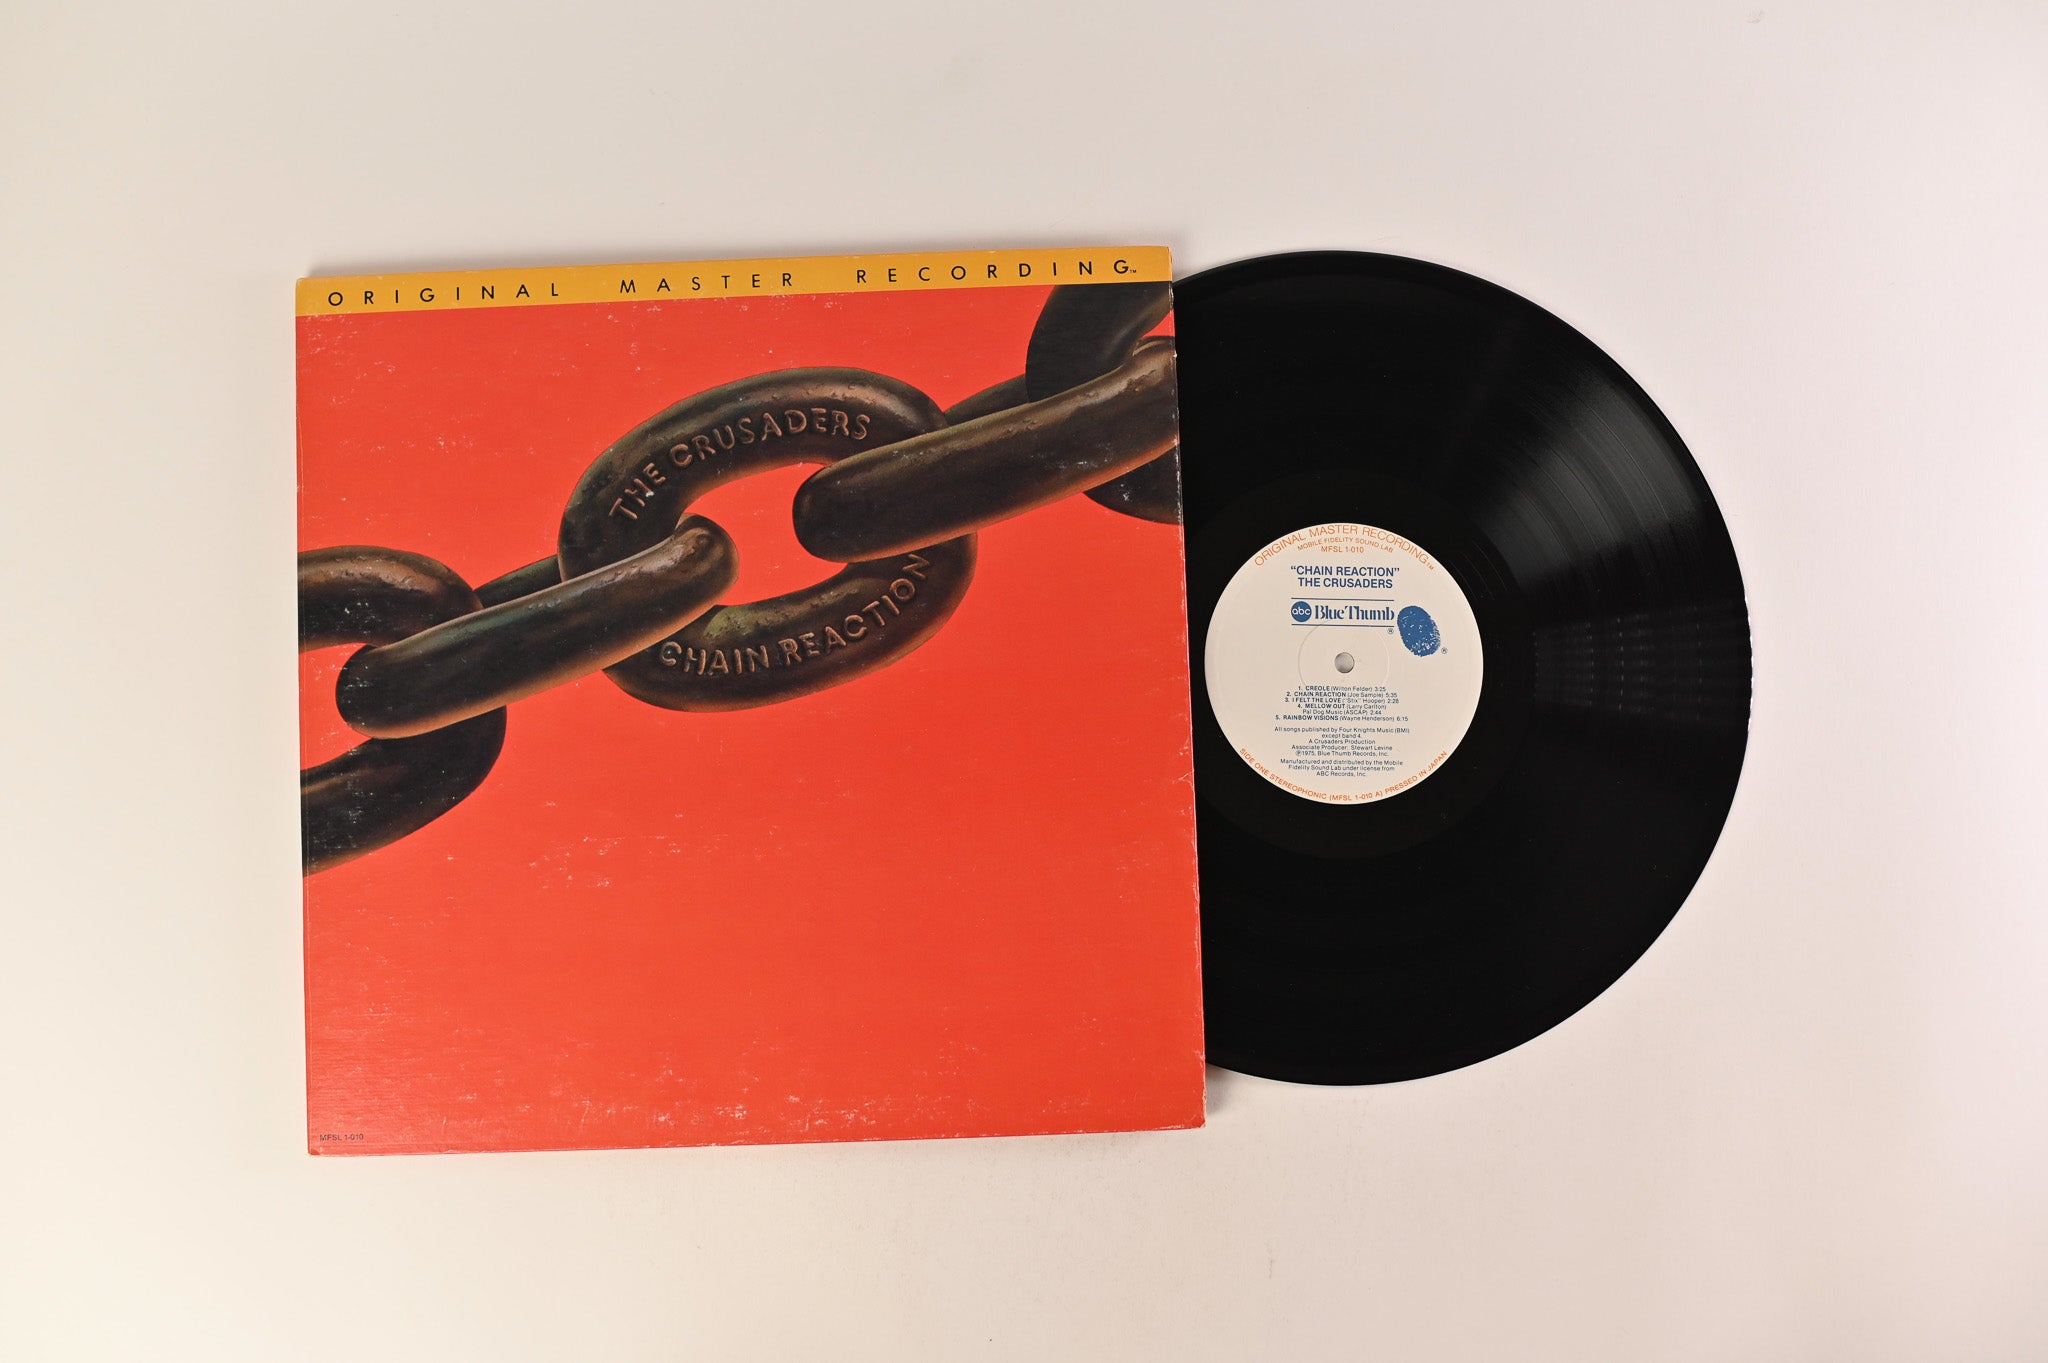 The Crusaders - Chain Reaction Reissue on Mobile Fidelity Sound Lab